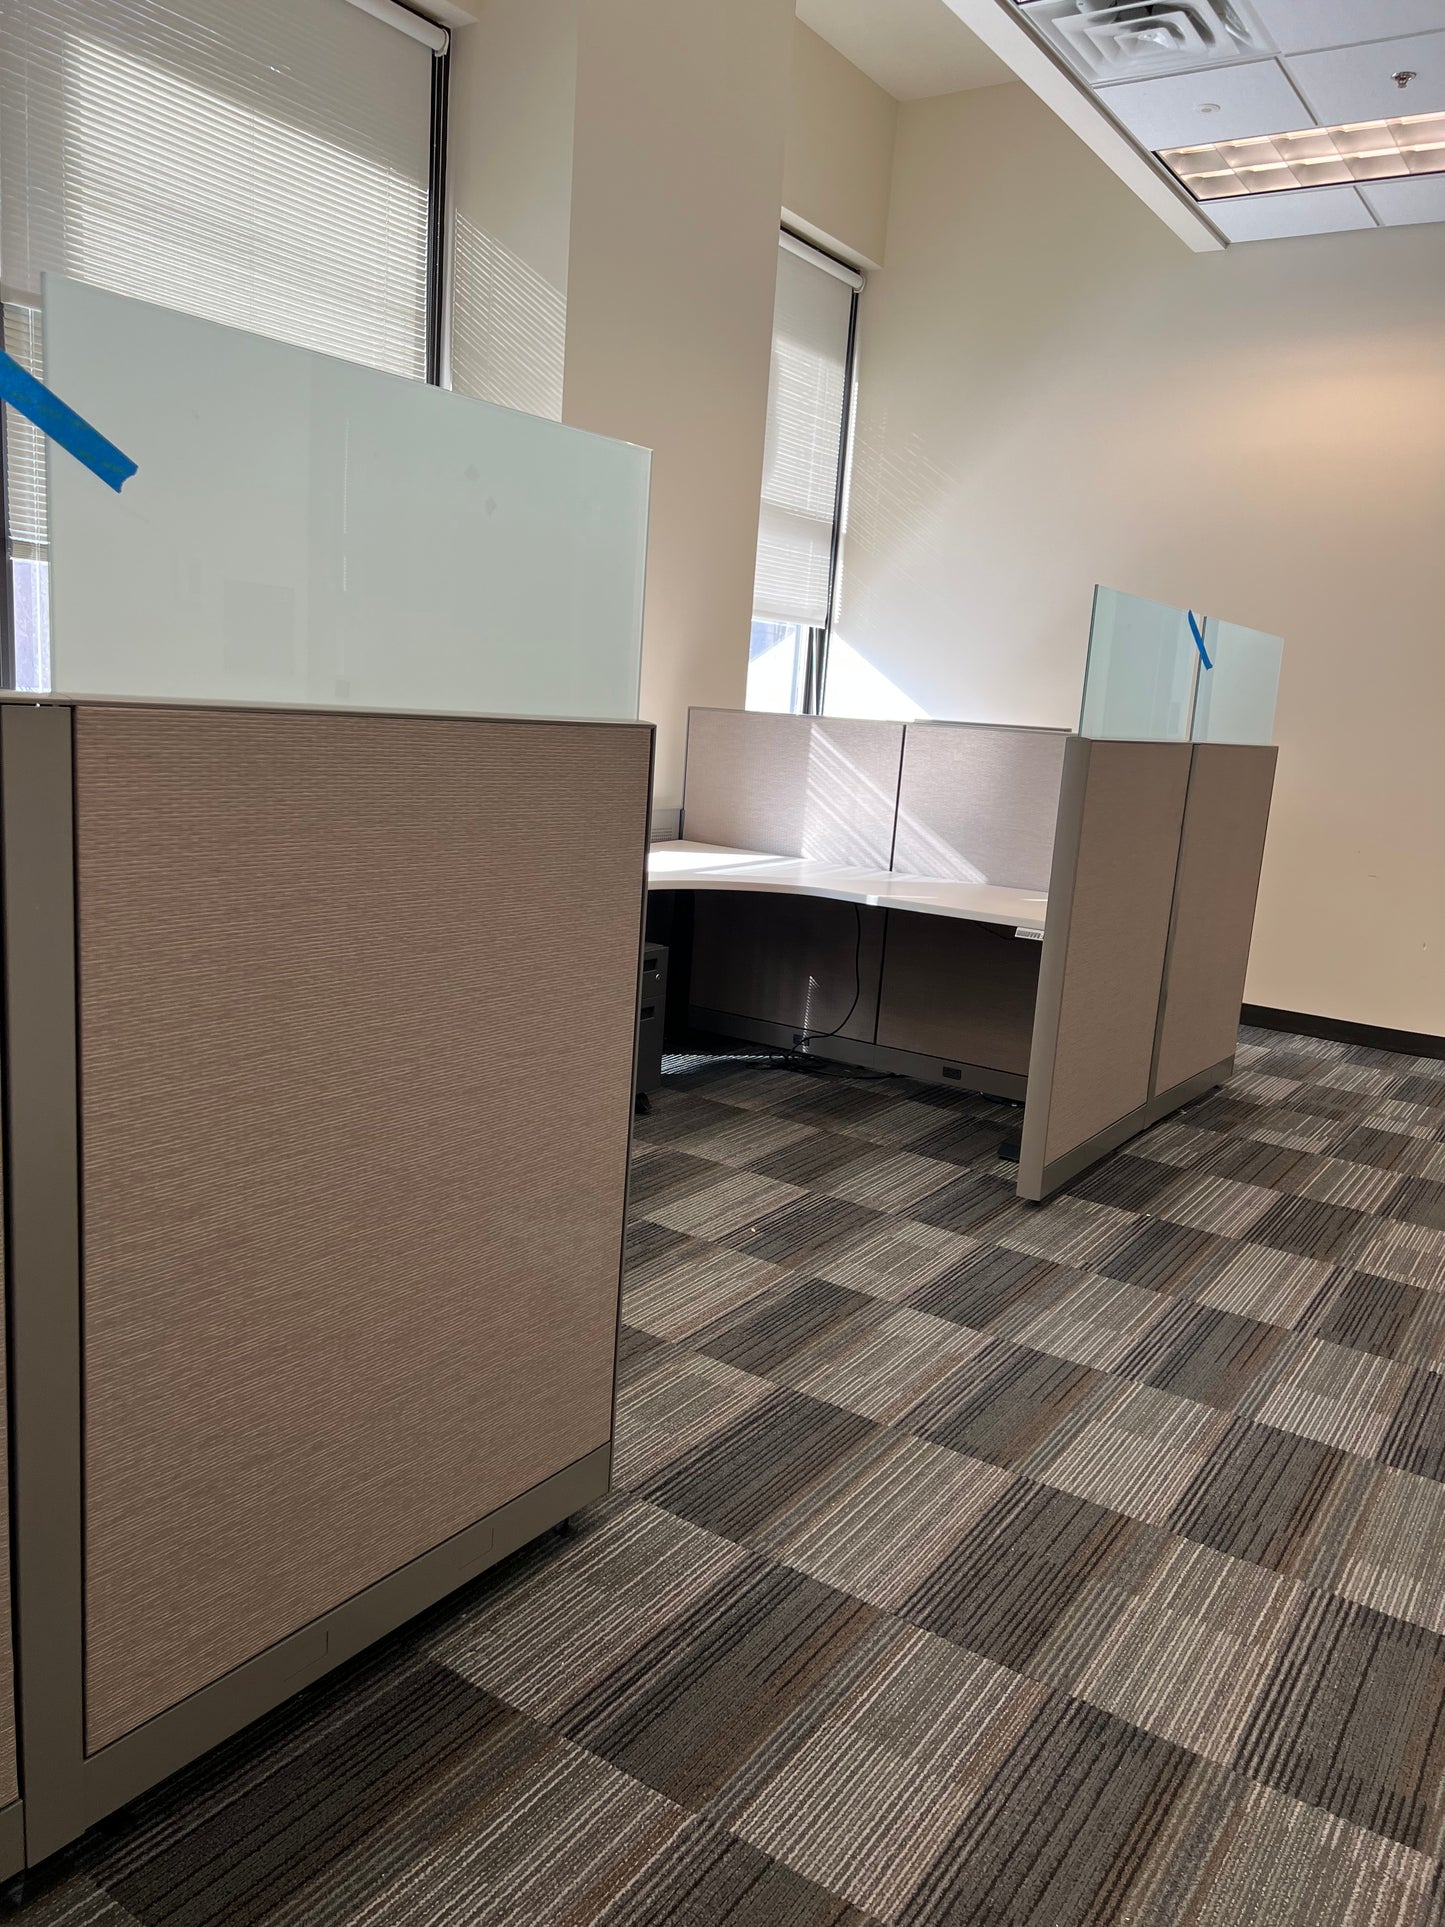 Photo of Allsteel Terrace cubicle panels